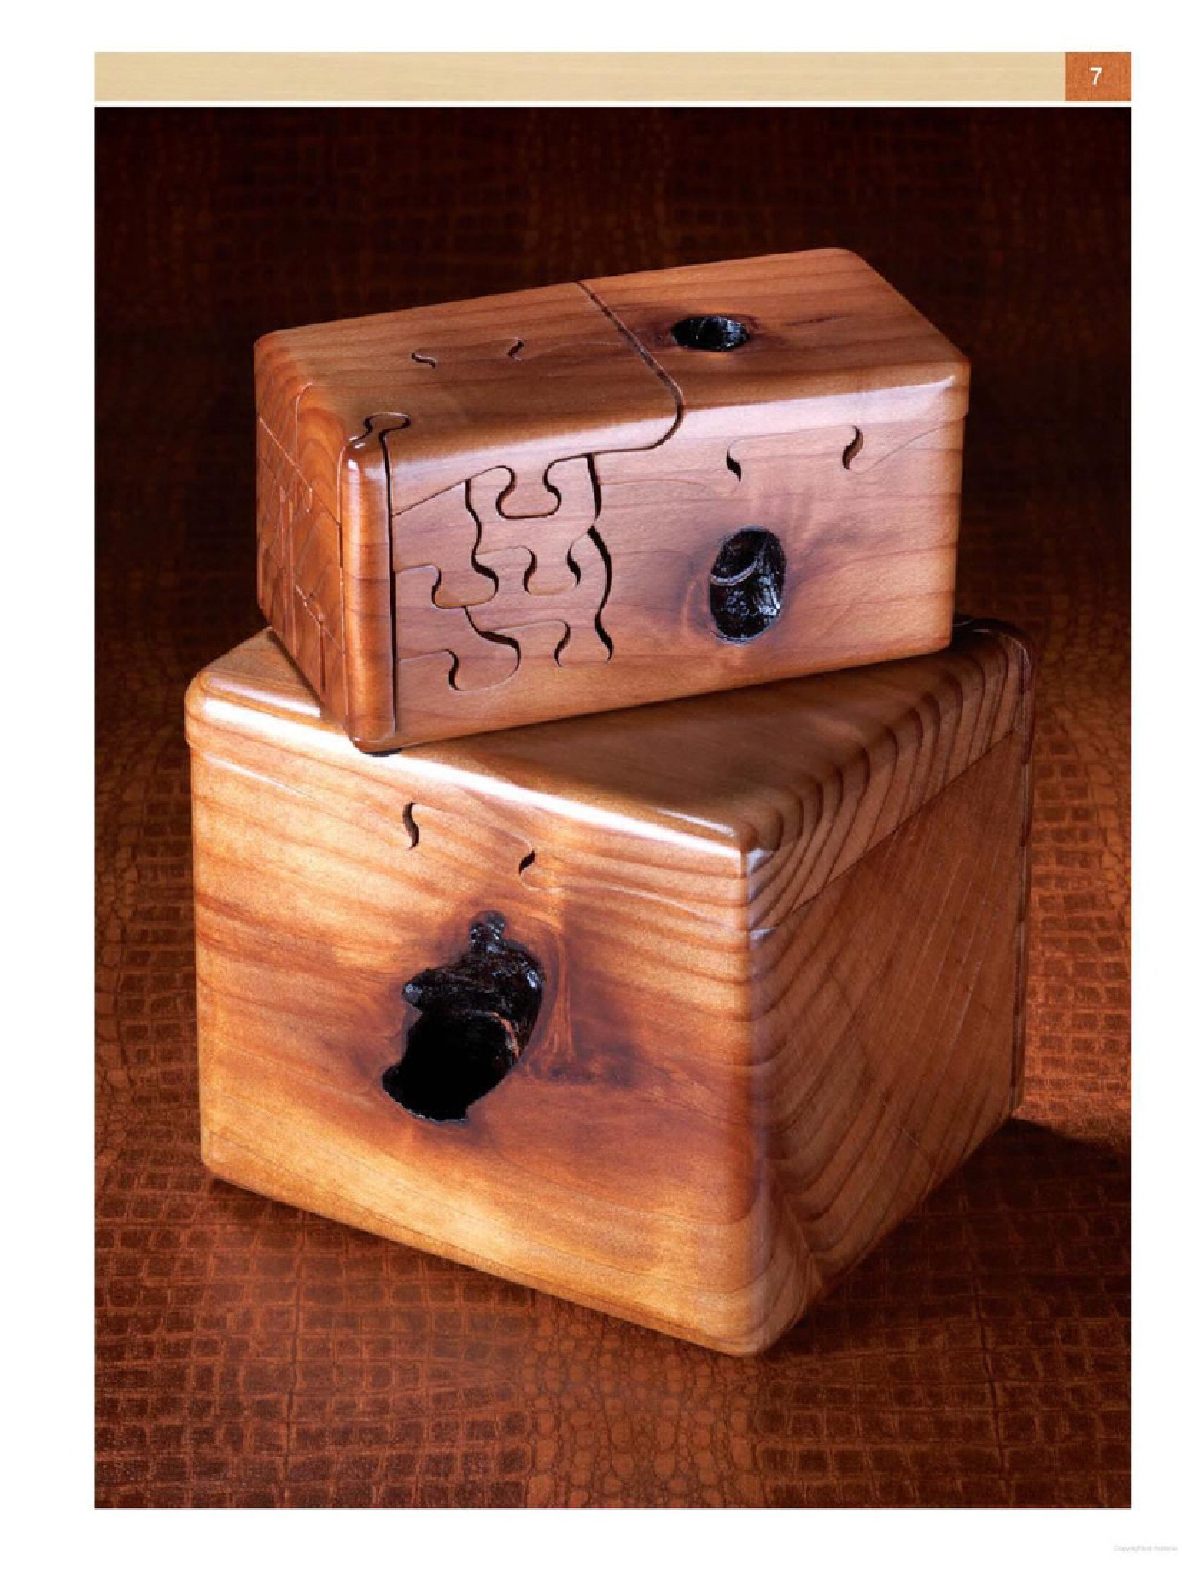 Puzzle Boxes- Fun and Intriguing Bandsaw Projects_益智盒：有趣和迷人的带锯床项目（热门木工）